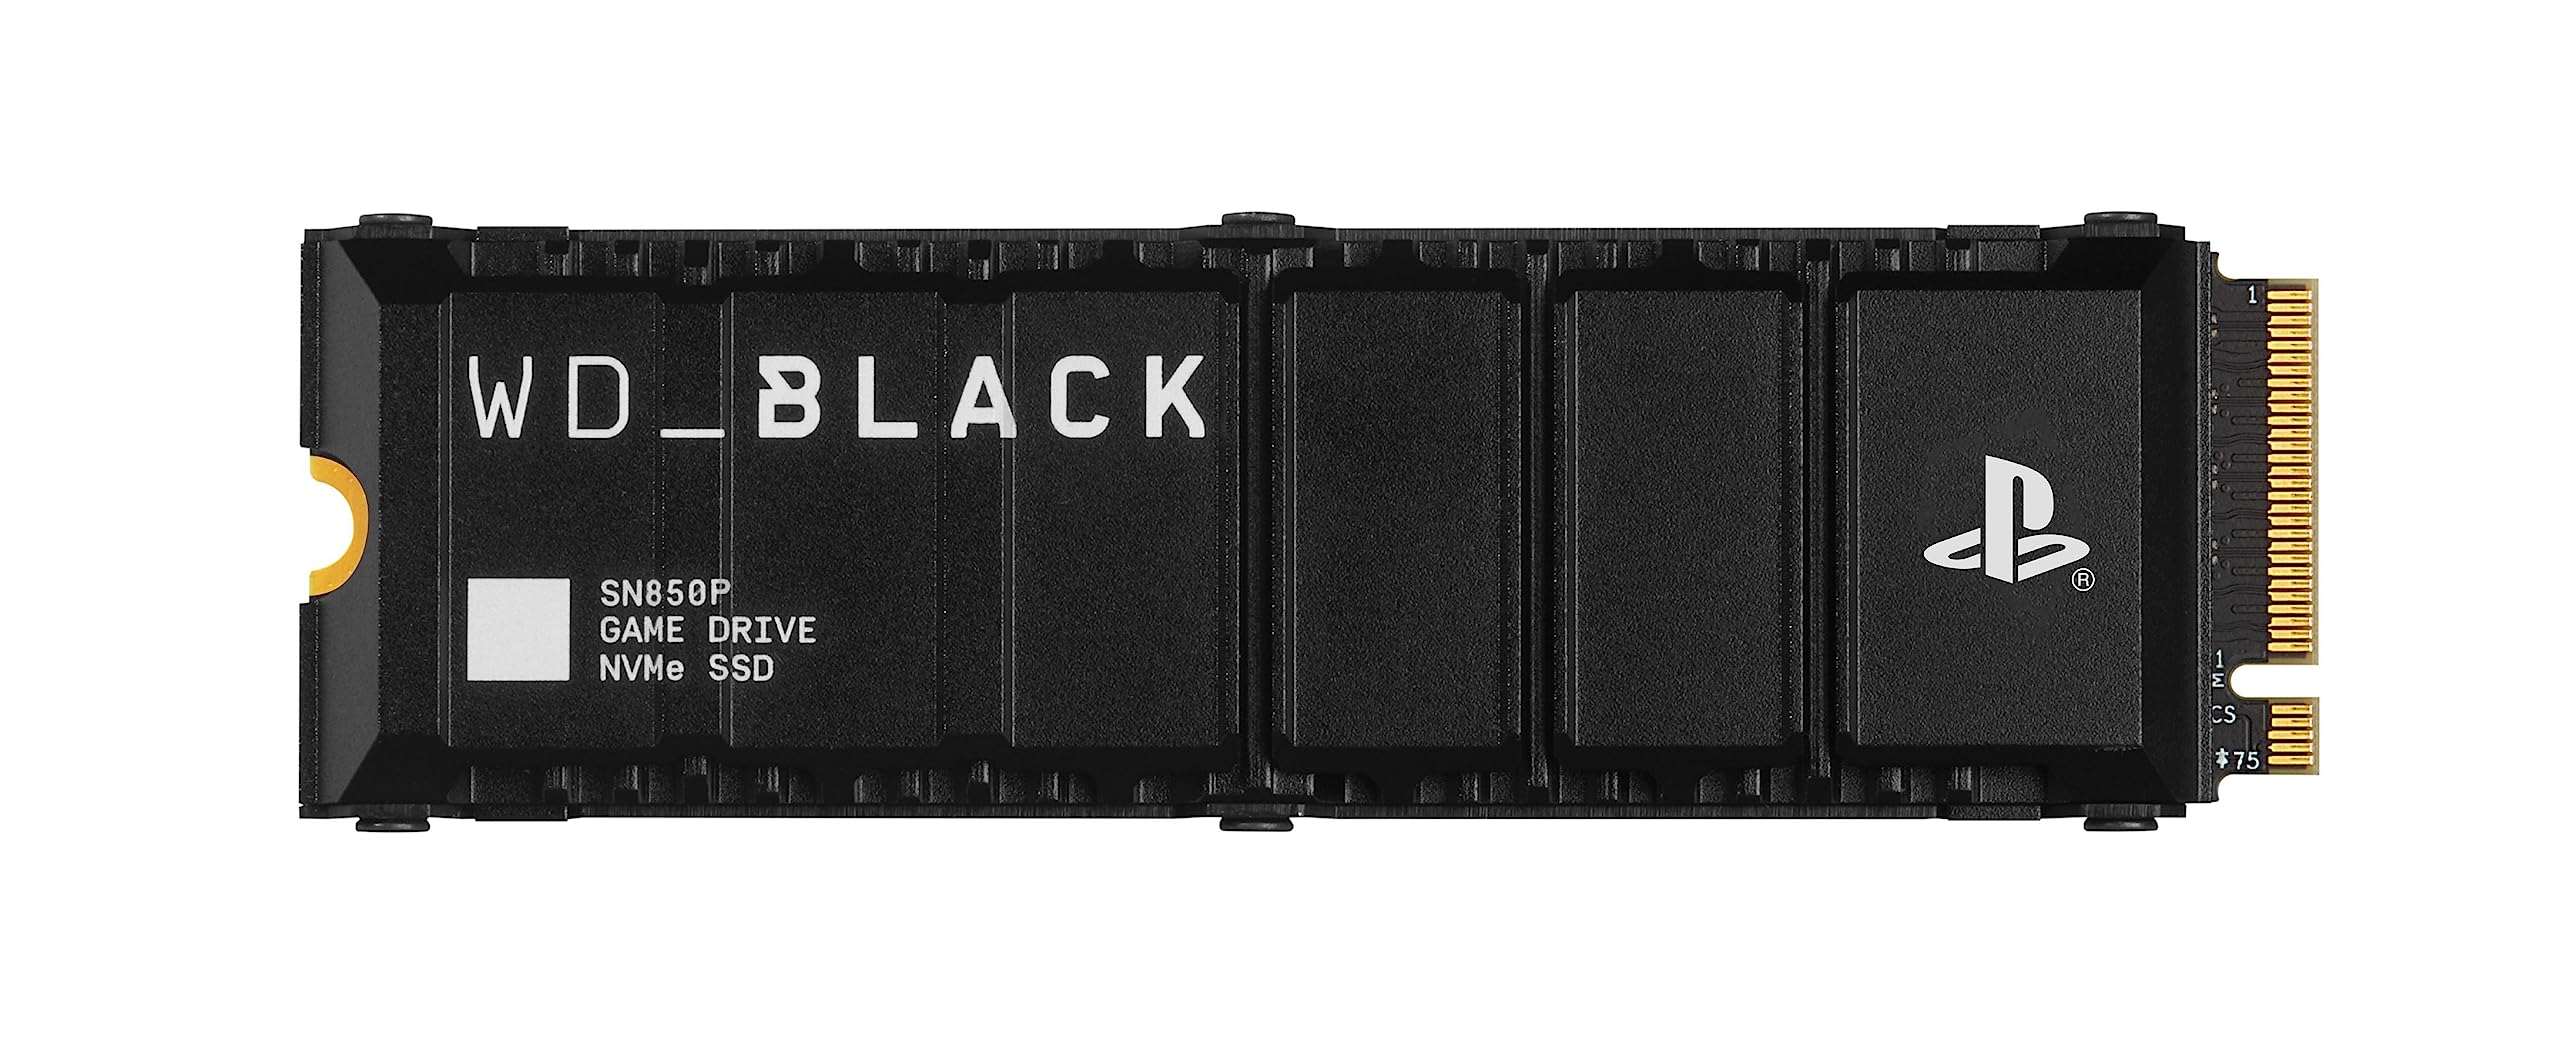 WD BLACK SN850P NVME SSD FOR